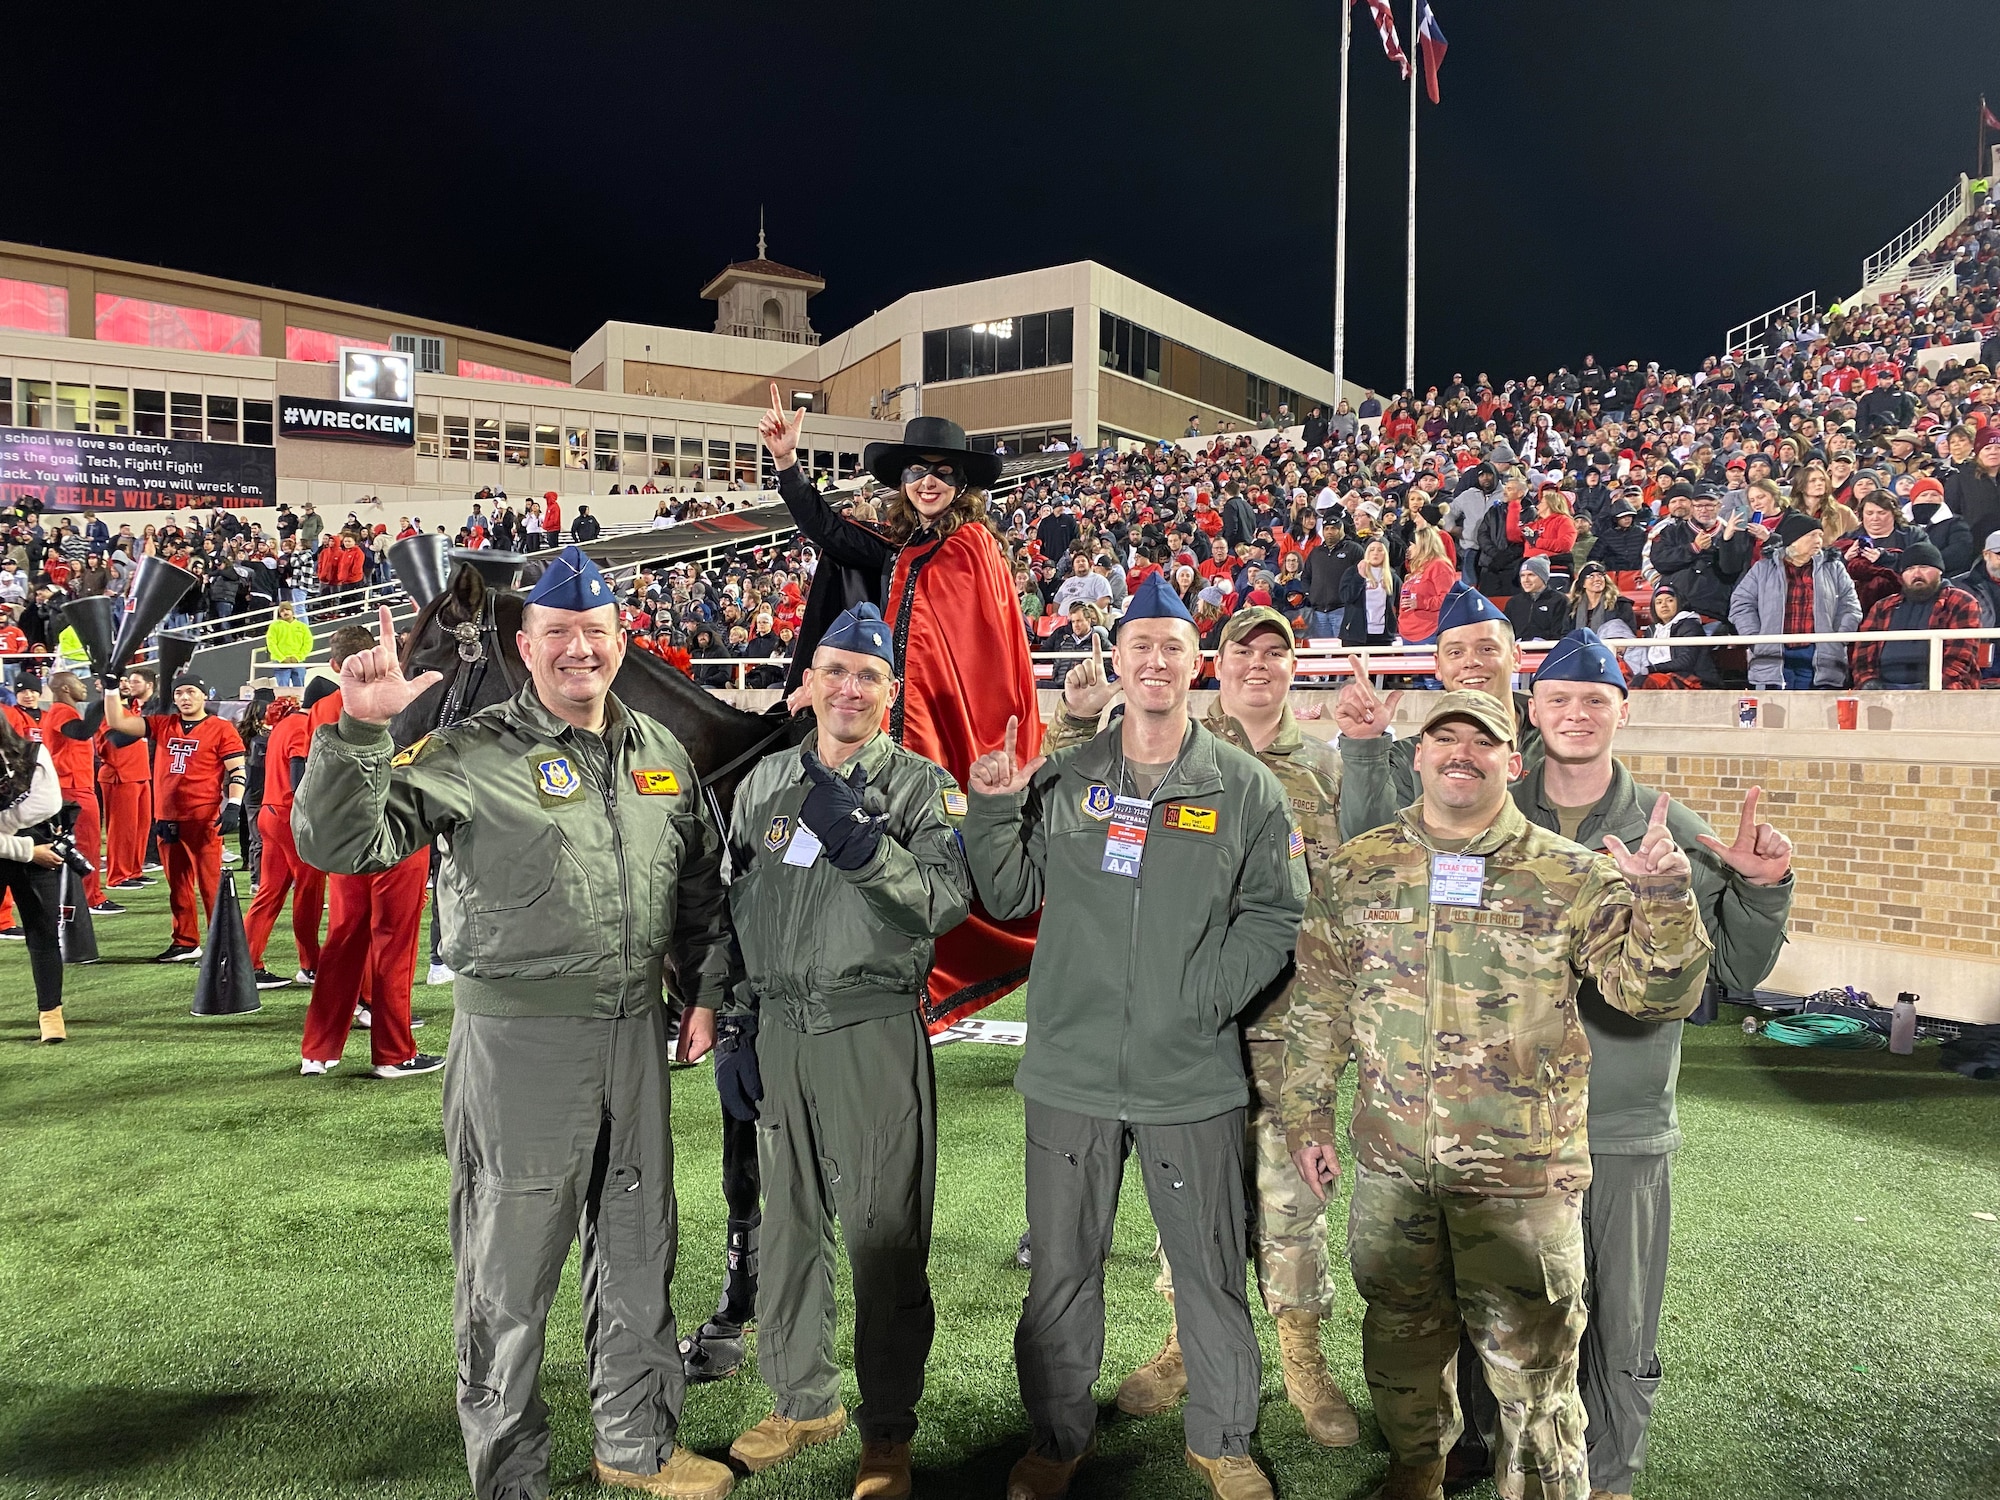 Members of the 507th Air Refueling Wing, Tinker Air Force Base, Oklahoma, participates in a flyover of a Texas Tech football game in honor of Veteran's Day weekend with Gen. Charles Q. Brown, Chief of Staff of the Air Force in attendance.